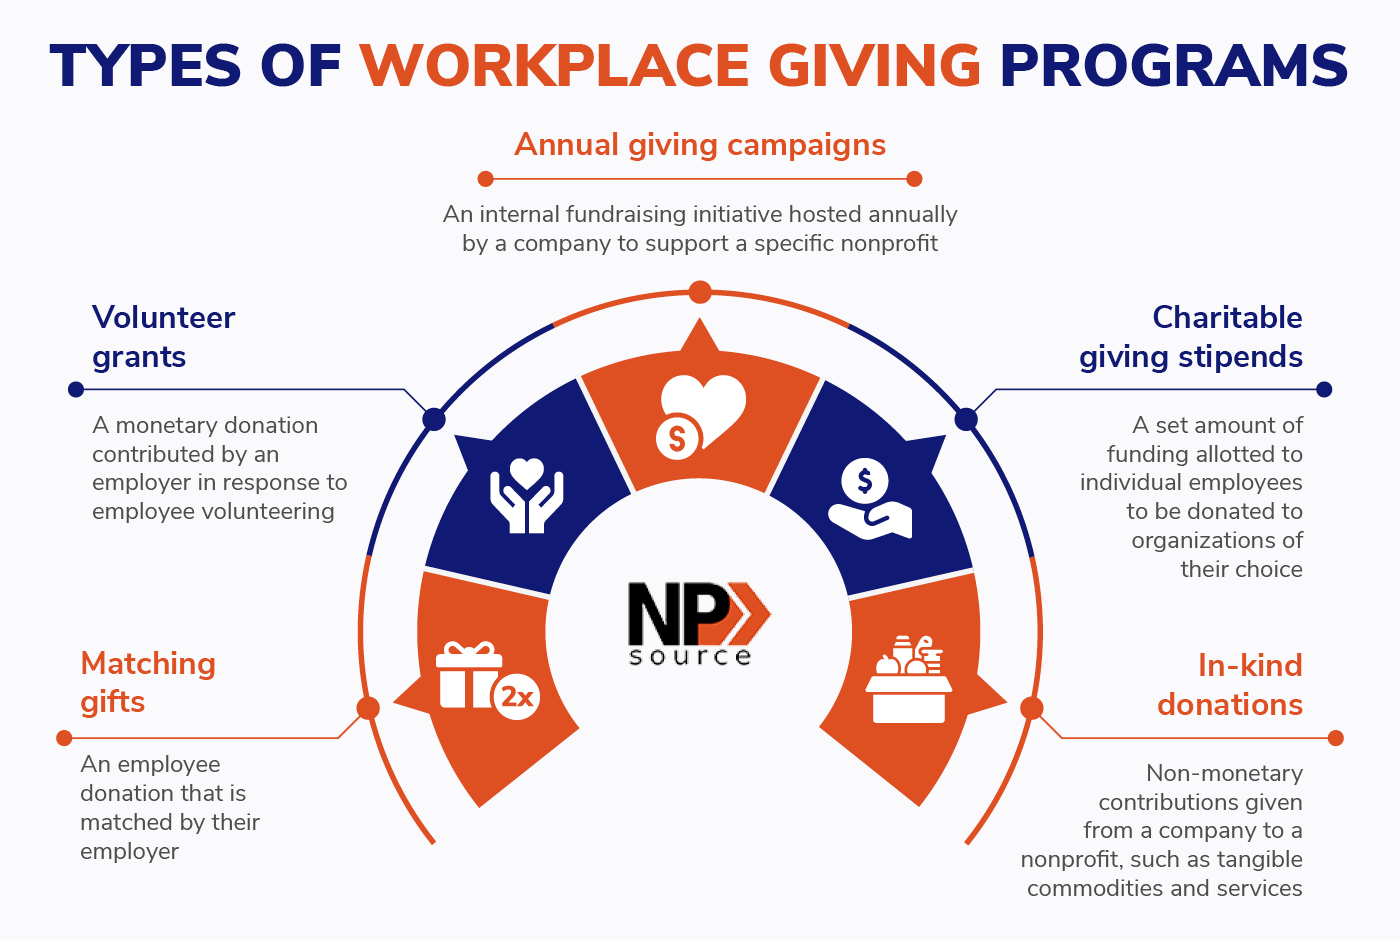 This image lists five popular types of workplace giving programs, detailed below.